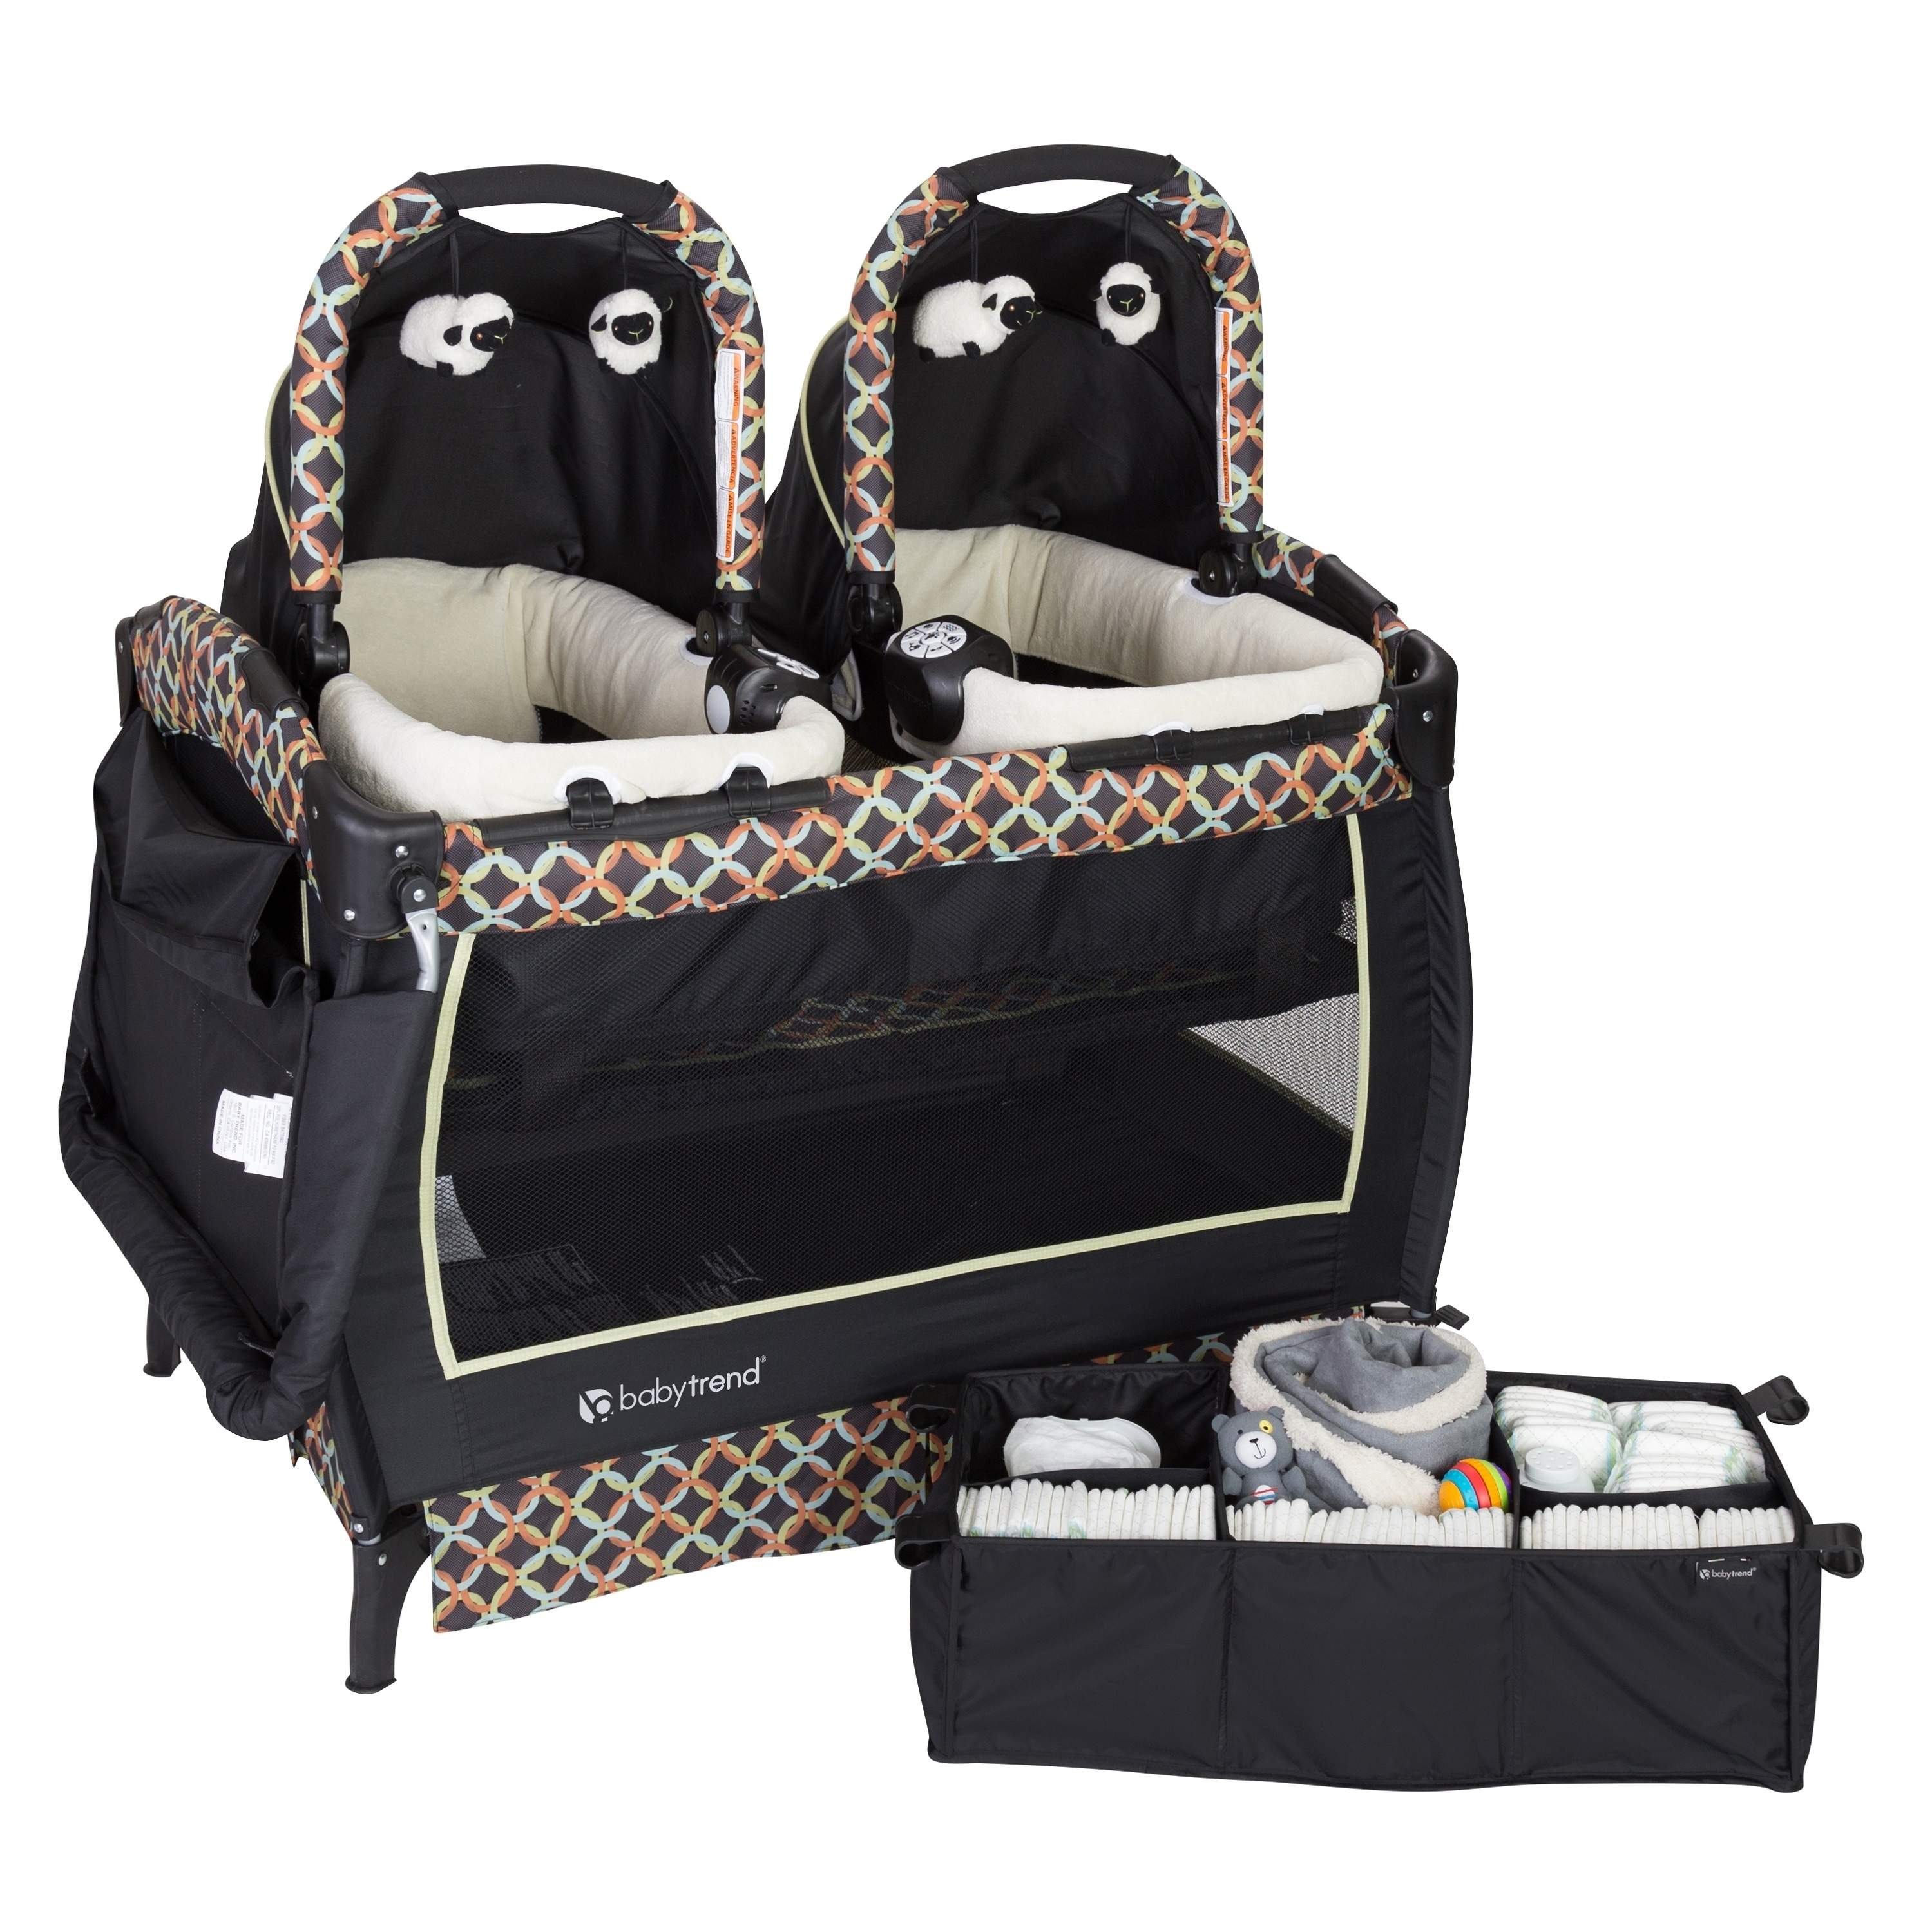 baby trend pack and play setup